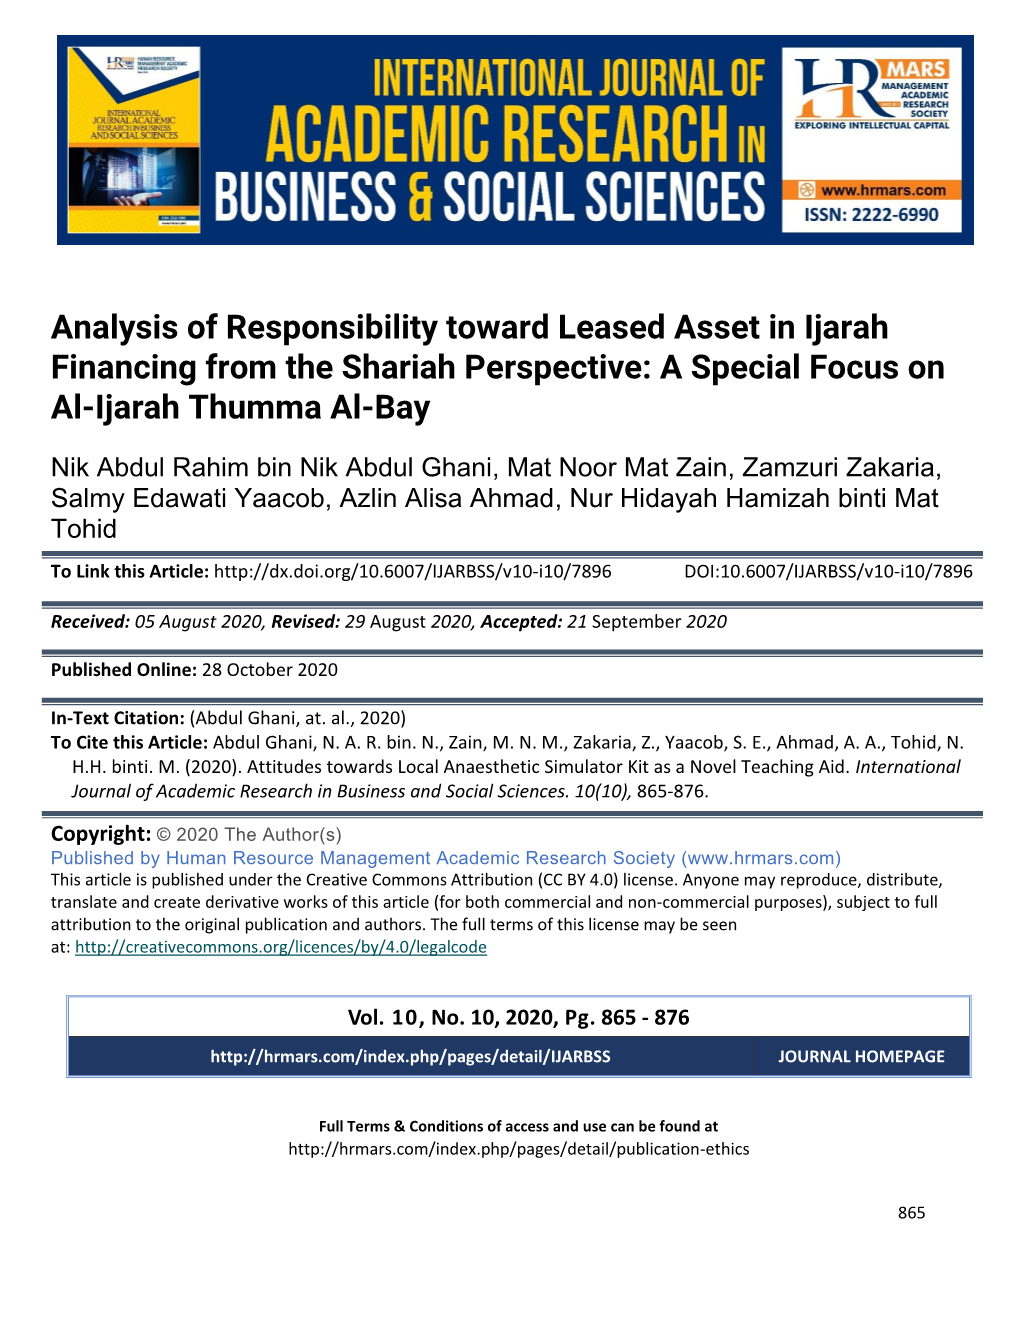 Analysis of Responsibility Toward Leased Asset in Ijarah Financing from the Shariah Perspective: a Special Focus on Al-Ijarah Thumma Al-Bay